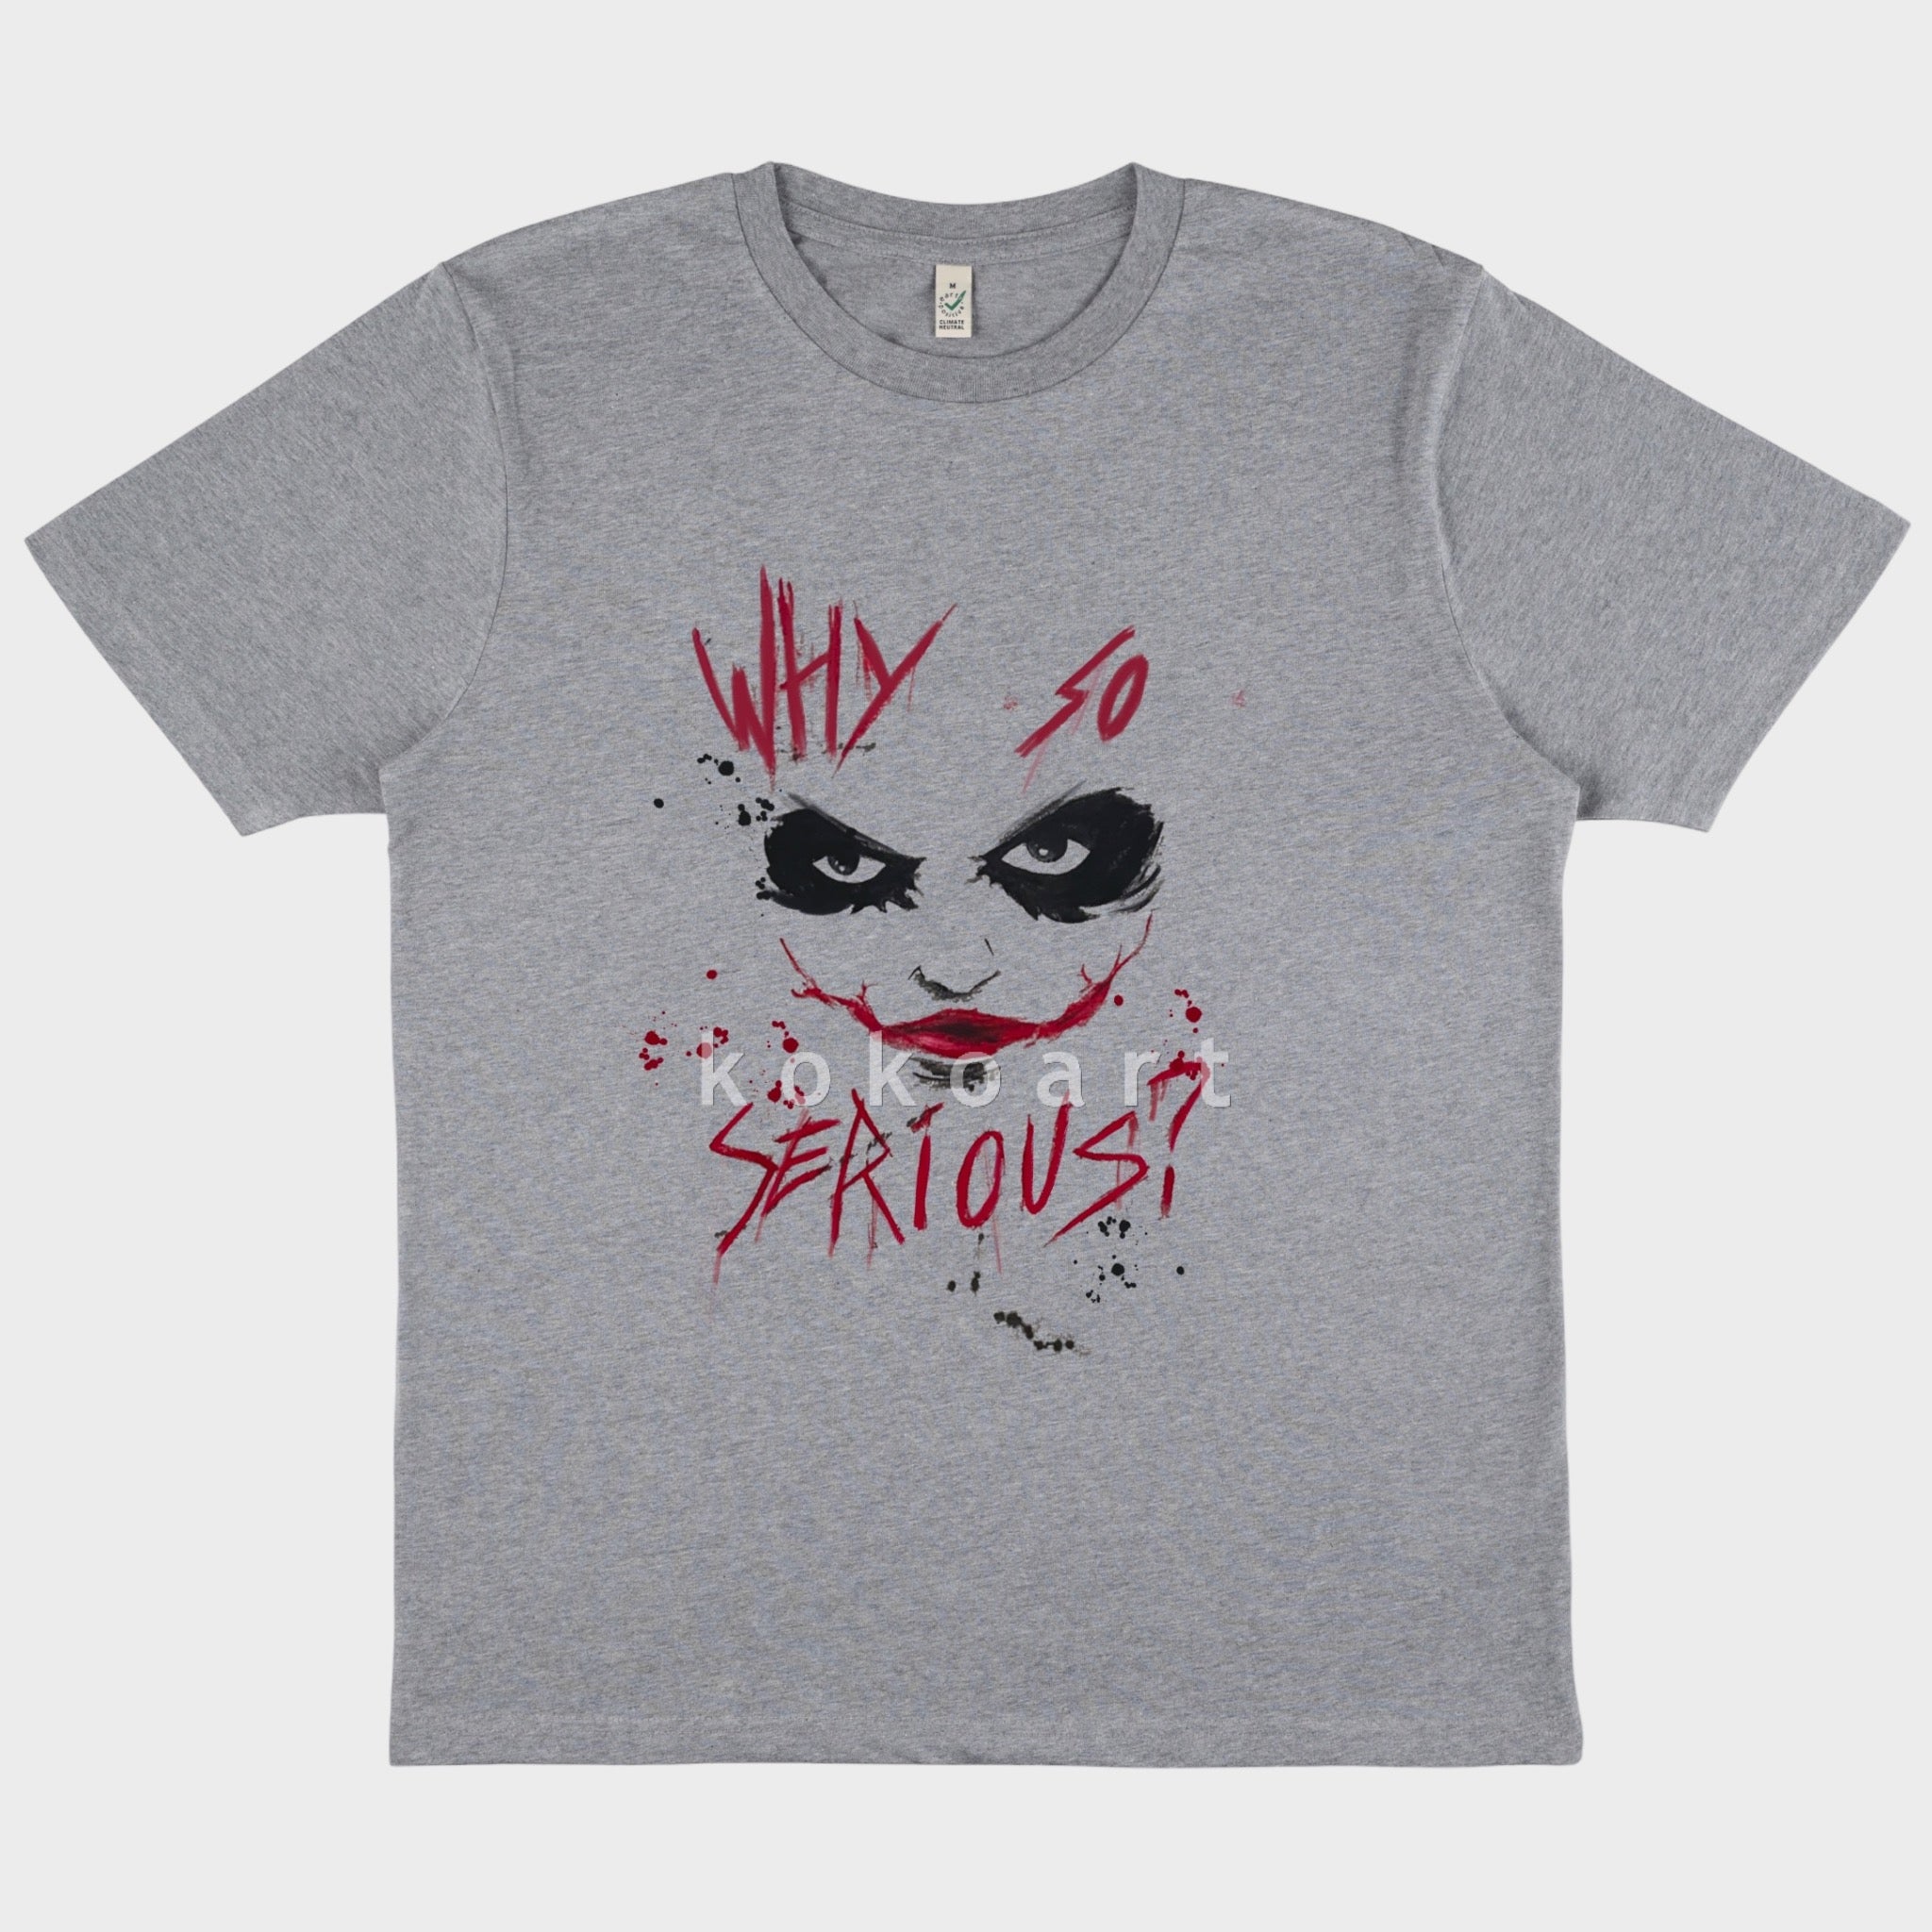 Why so Serious - Hand painted Organic Cotton Clothing